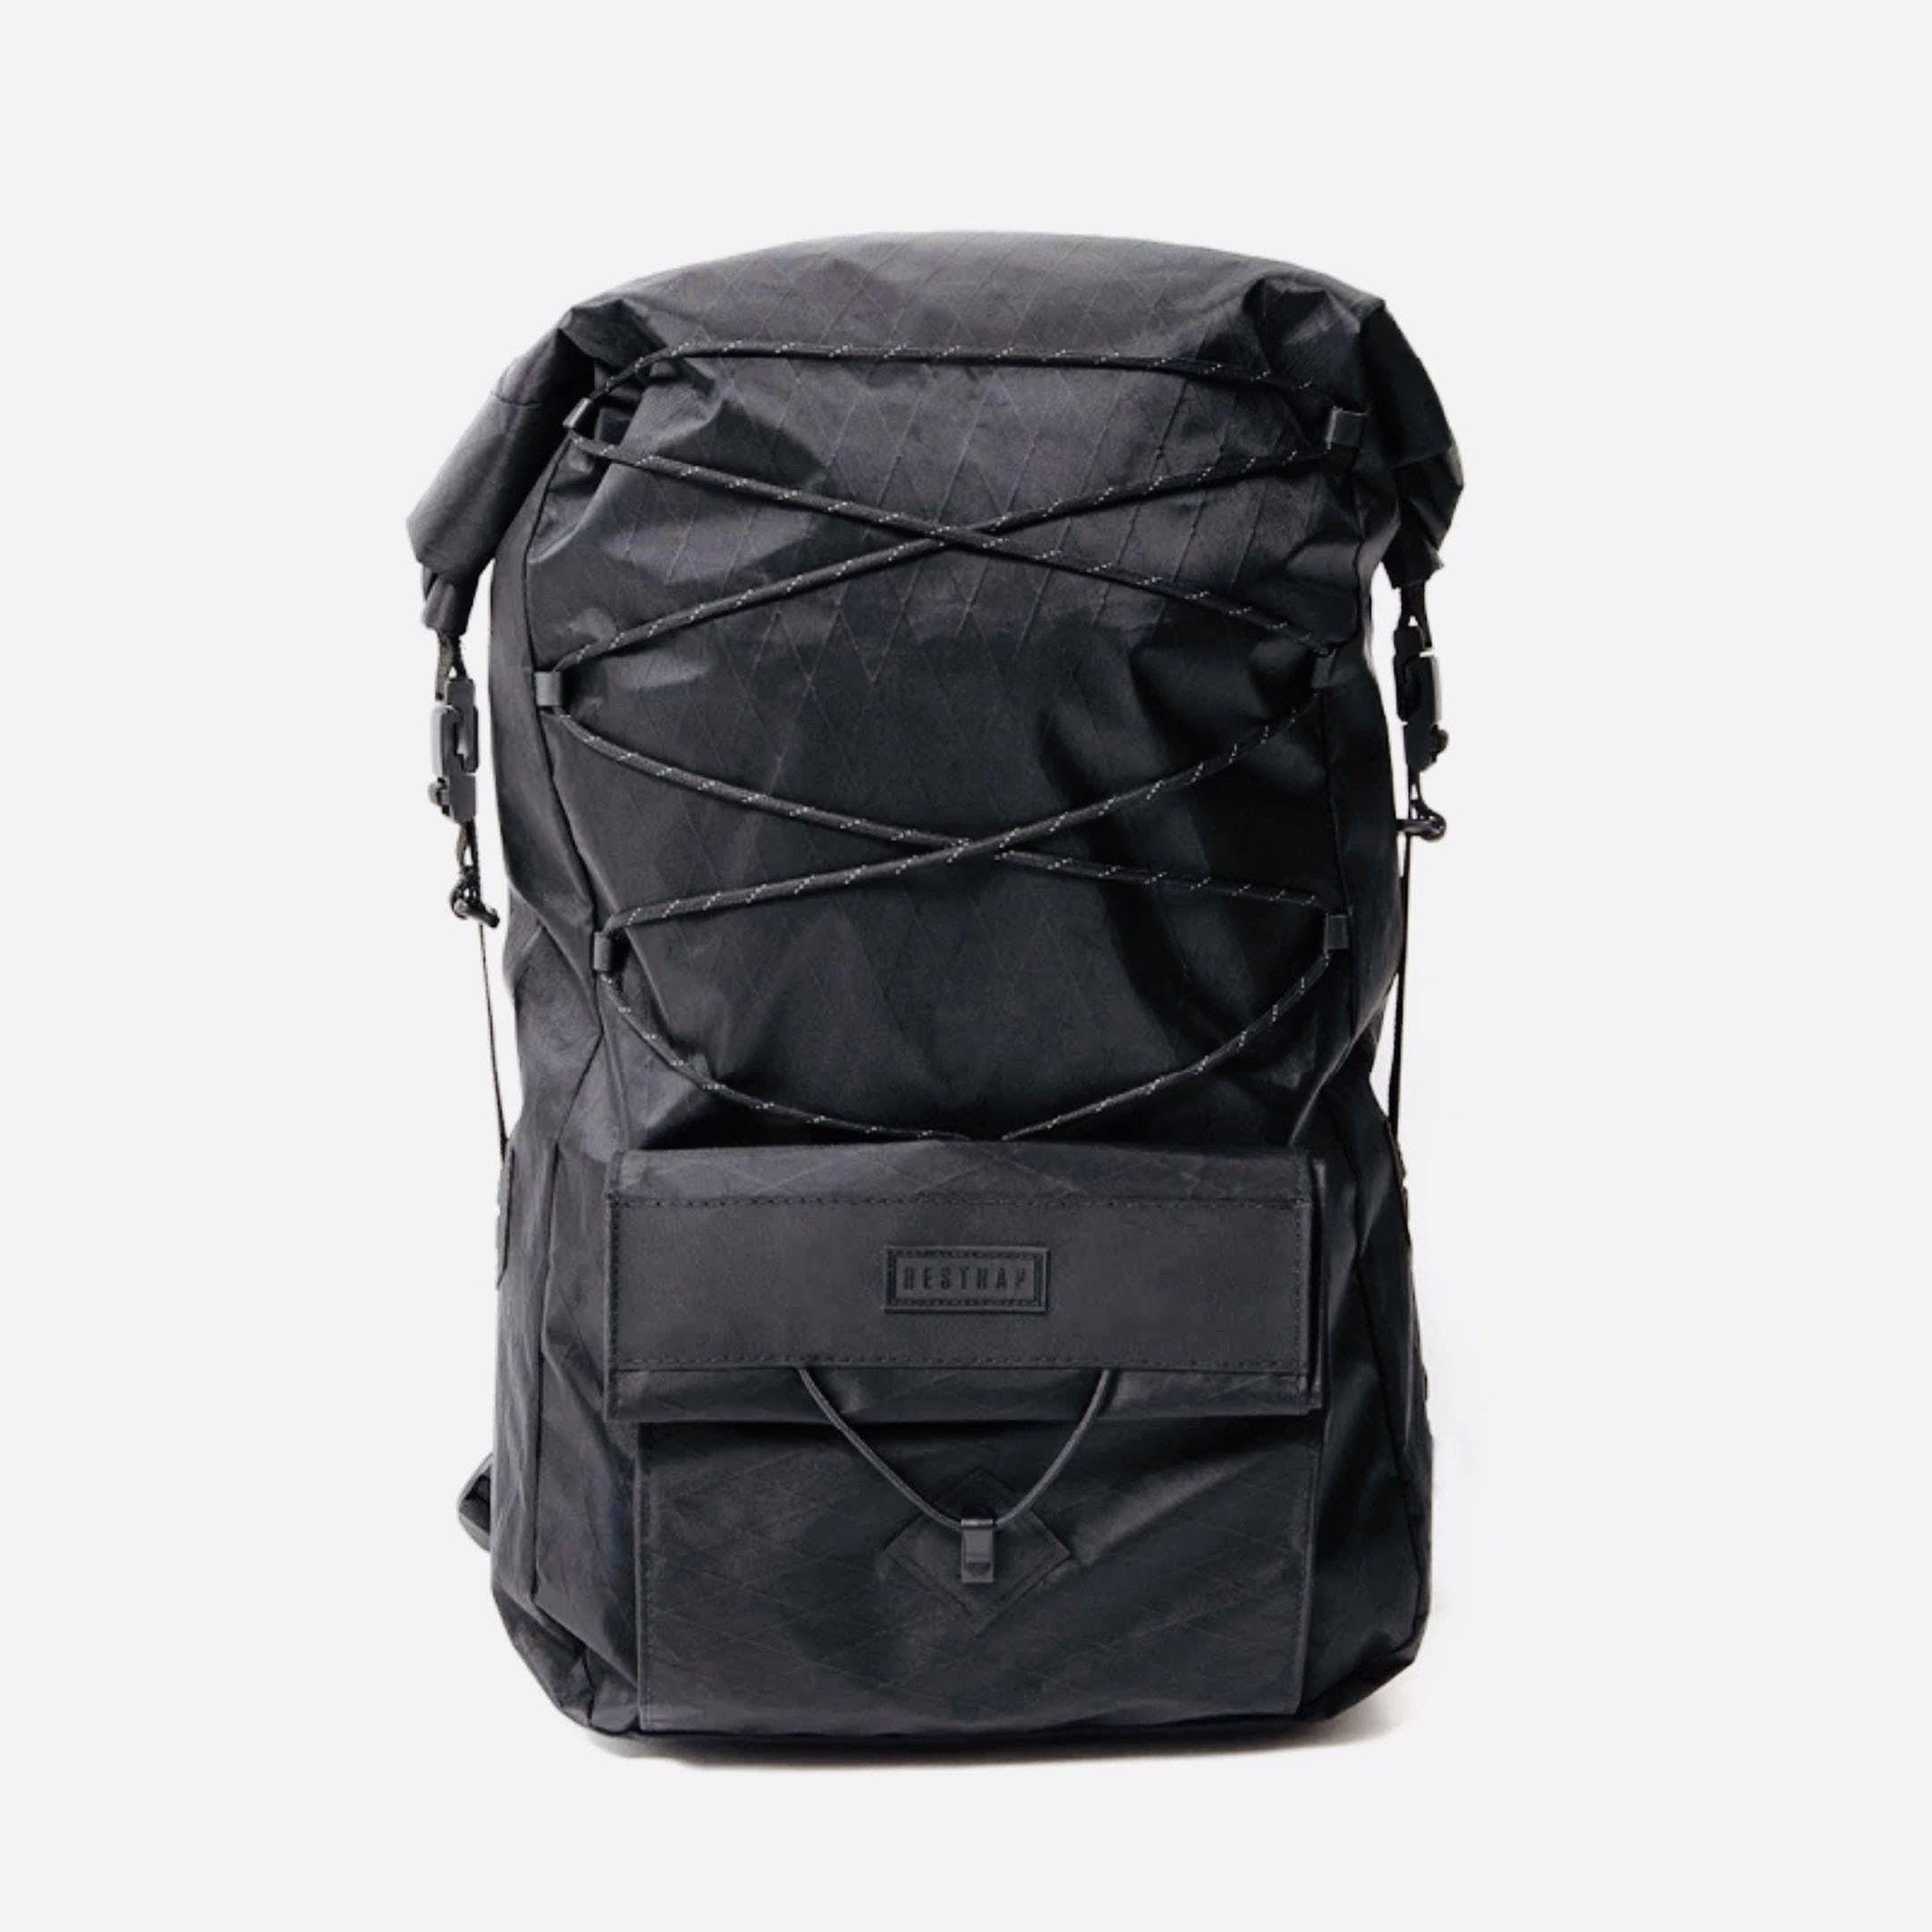 Restrap Ascent Backpack Black Accessories - Bags - Backpacks